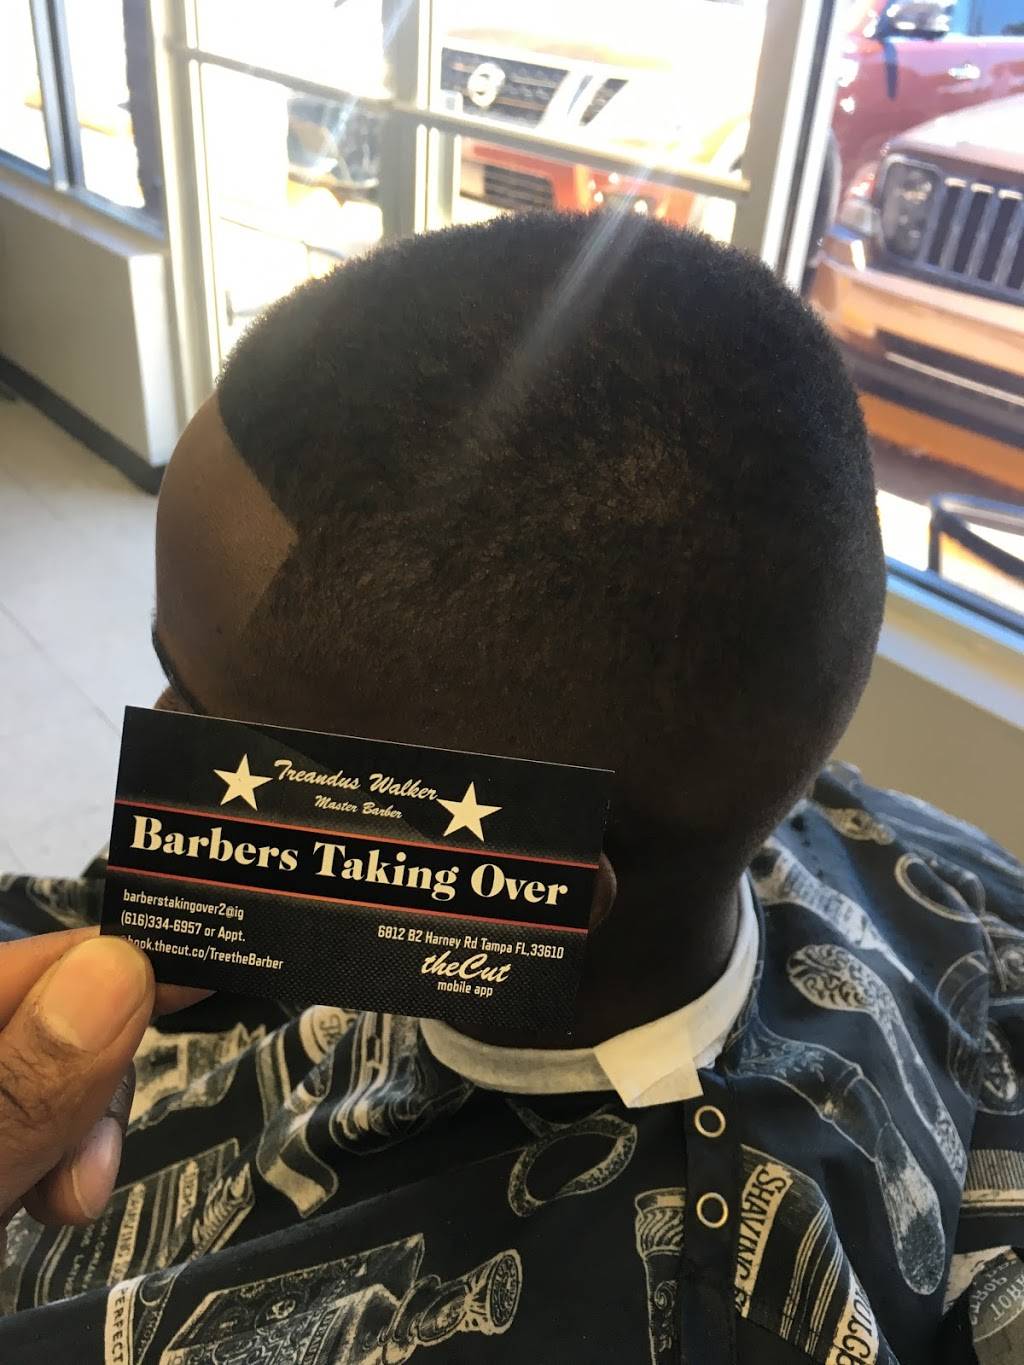 Barbers Taking Over | 6812 Harney Rd b2, Tampa, FL 33610 | Phone: (813) 650-4758